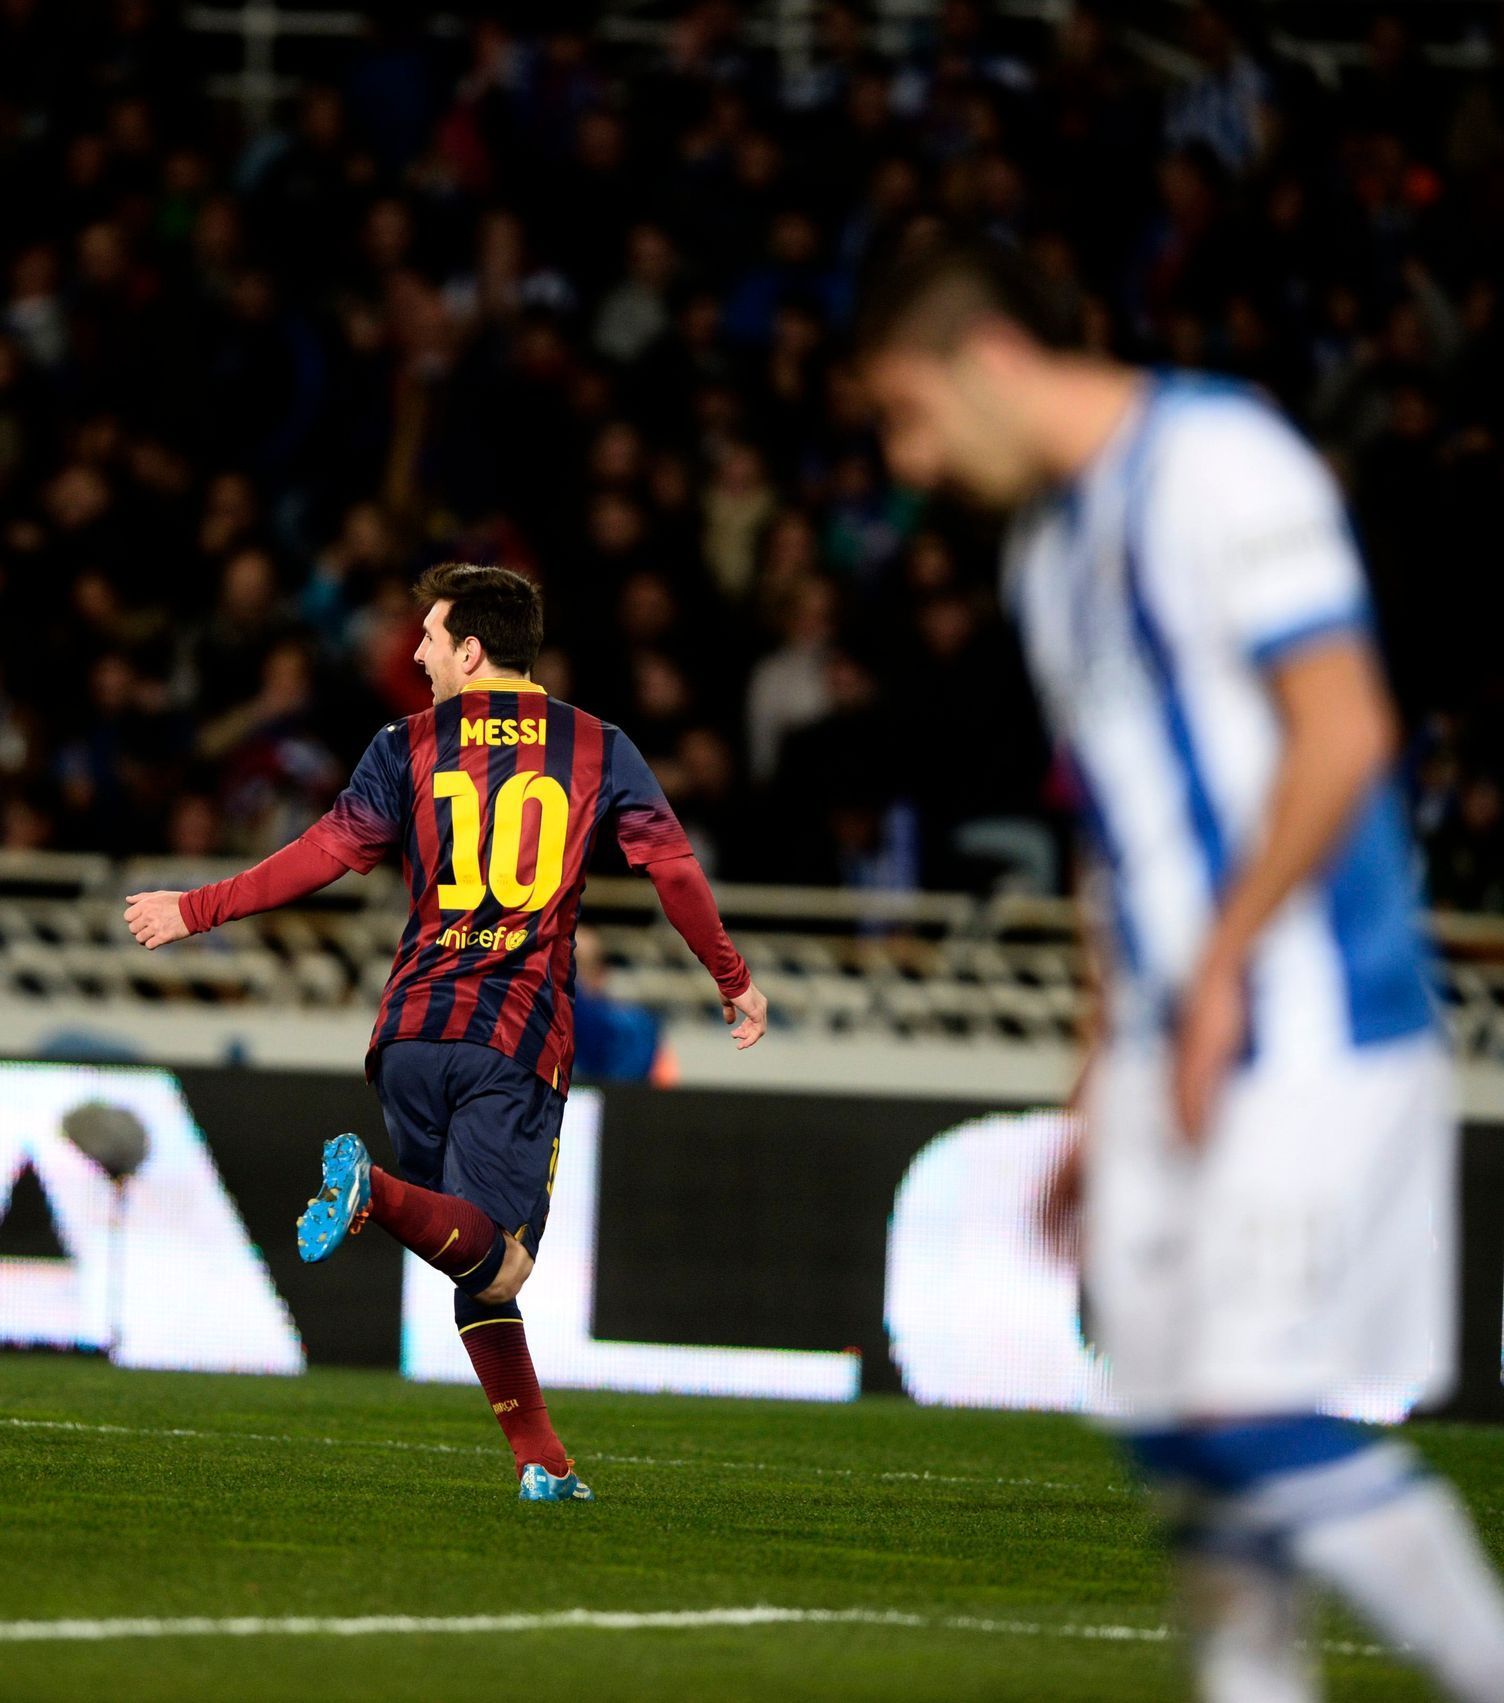 Barcelona's Messi celebrates a goal during their Spanish King's Cup semi-final second leg soccer match against Real Sociedad in San Sebastian